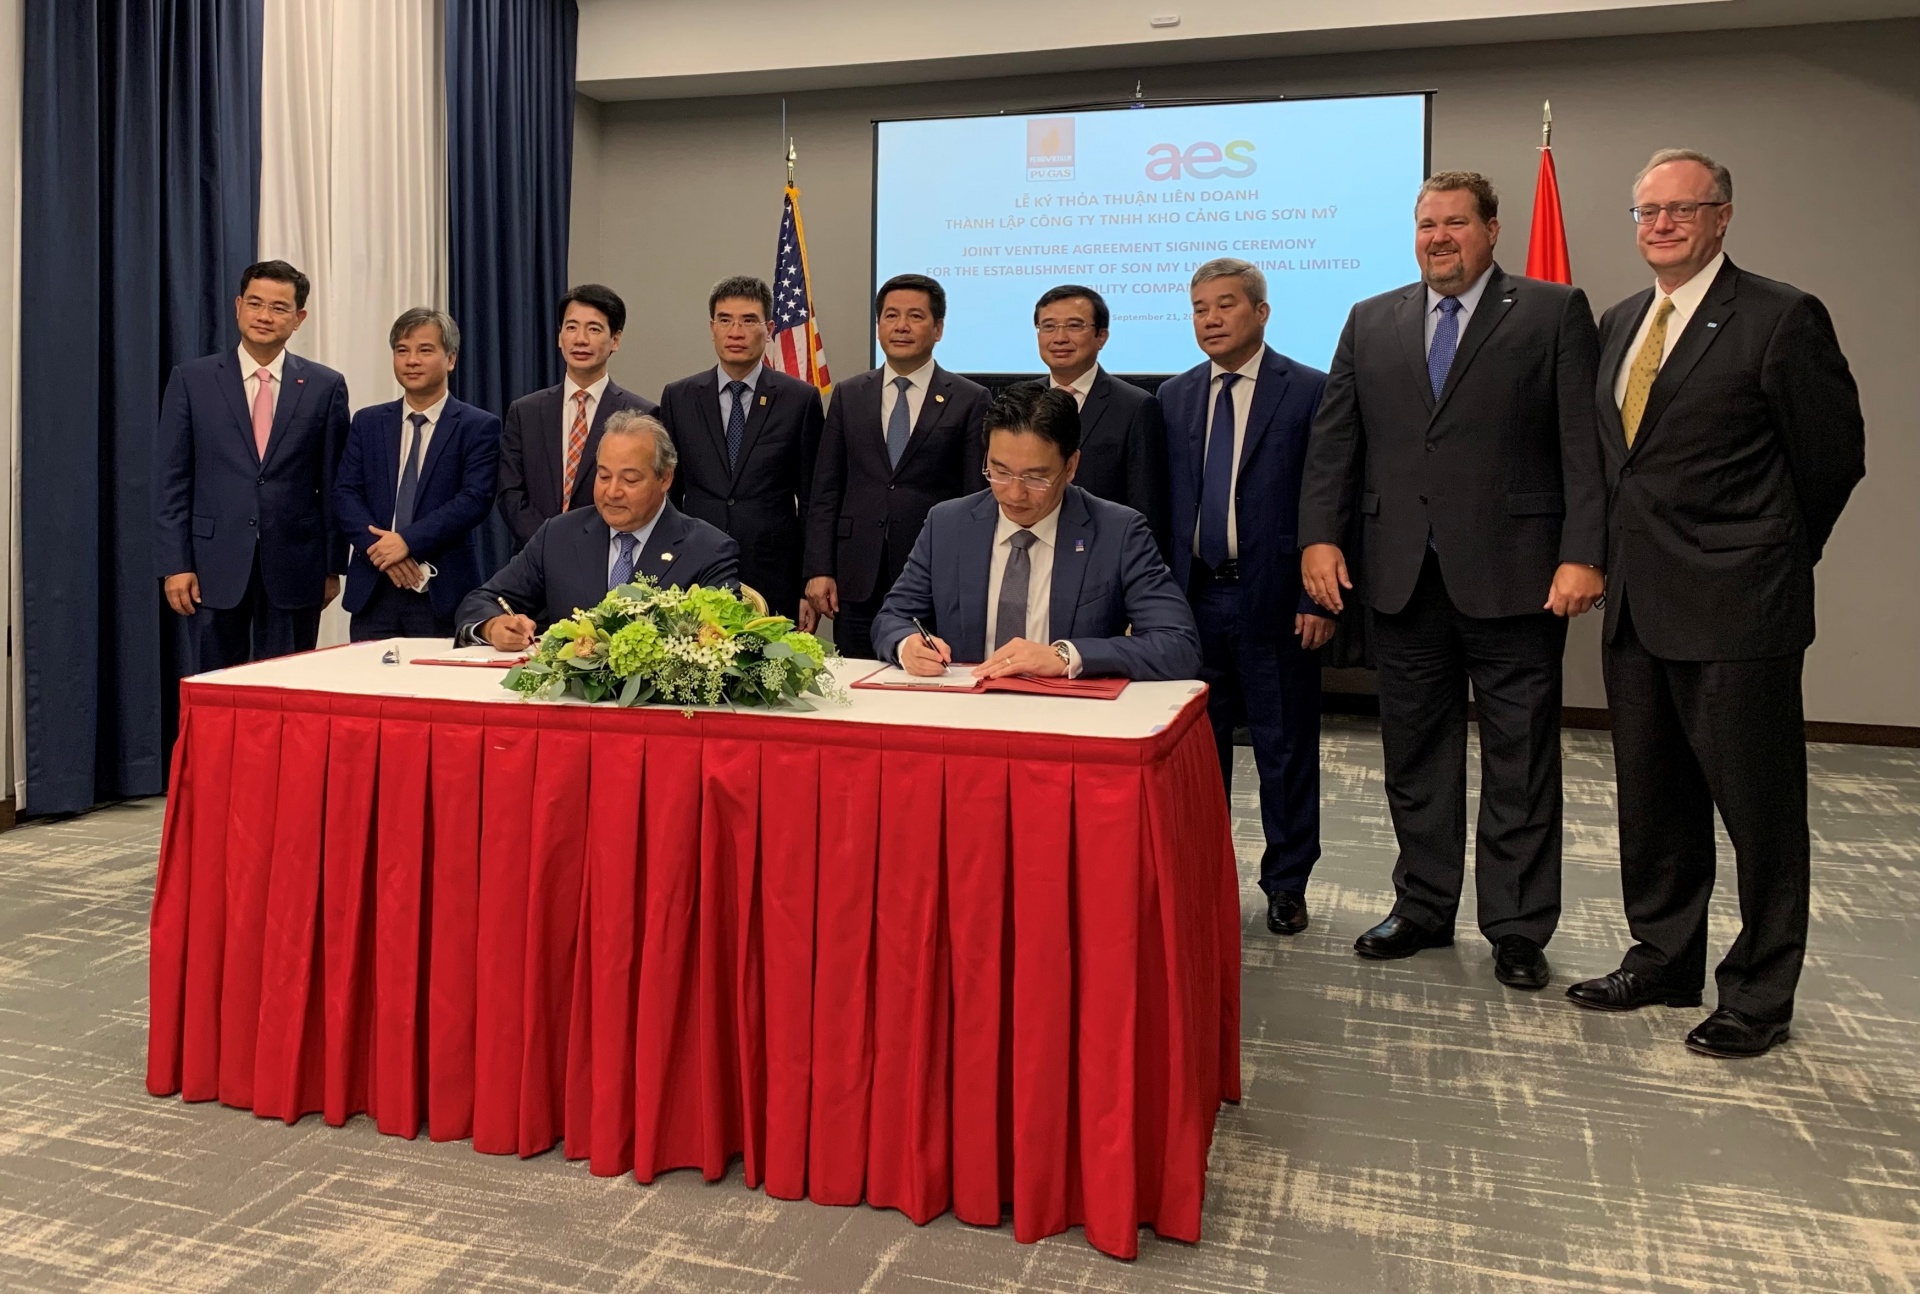 AES and PV Gas sign joint venture agreement for Son My LNG Terminal